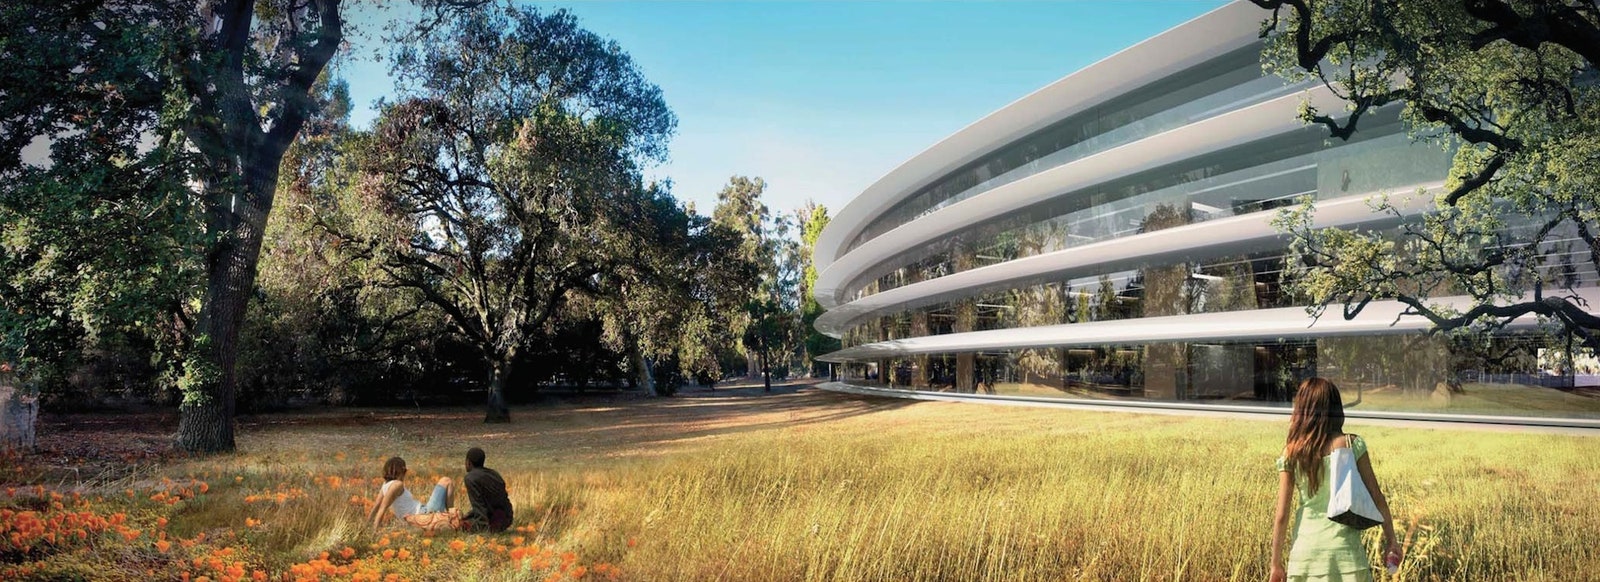 Apple Campus 2 by FosterPartners.